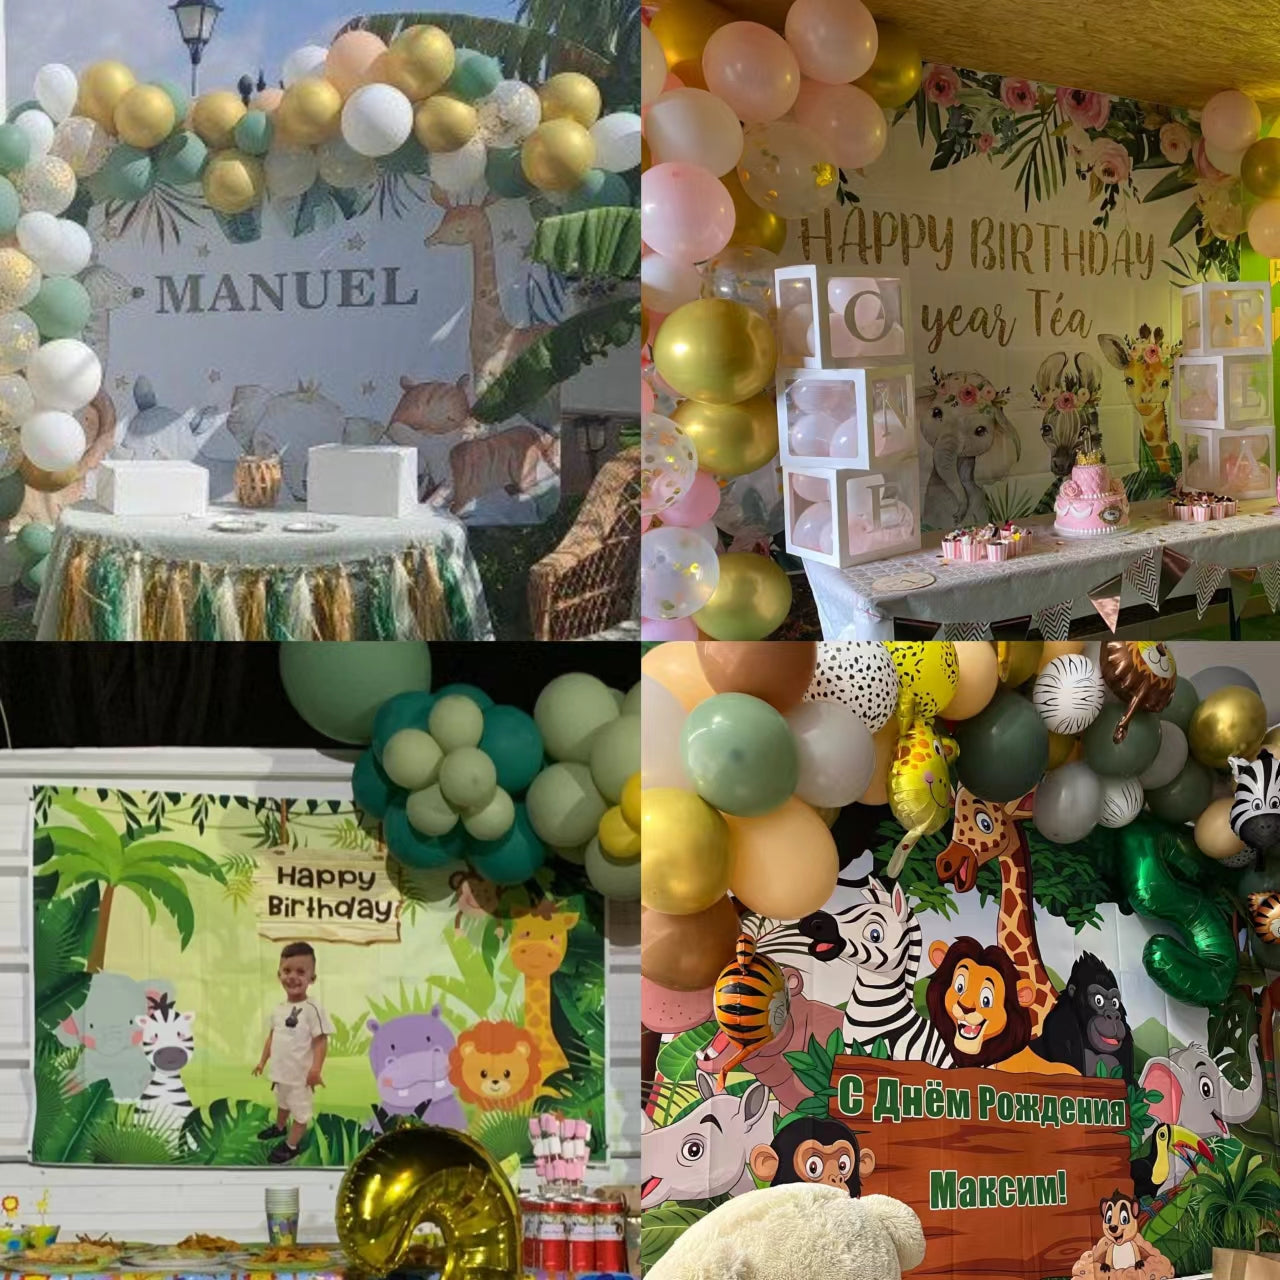 Birthday Party Backdrop Banner